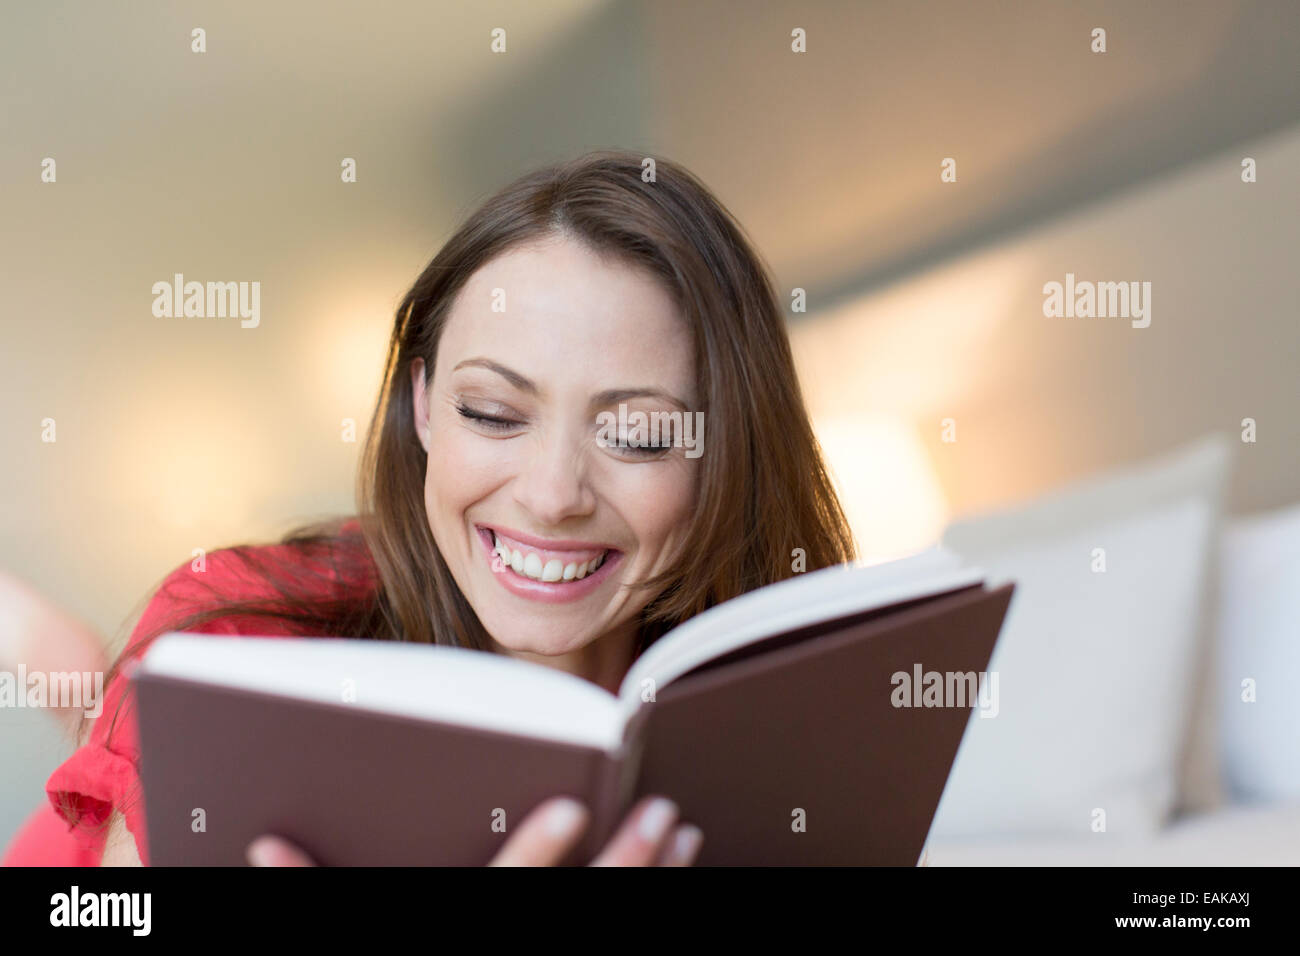 Smiling woman reading book in bedroom Stock Photo